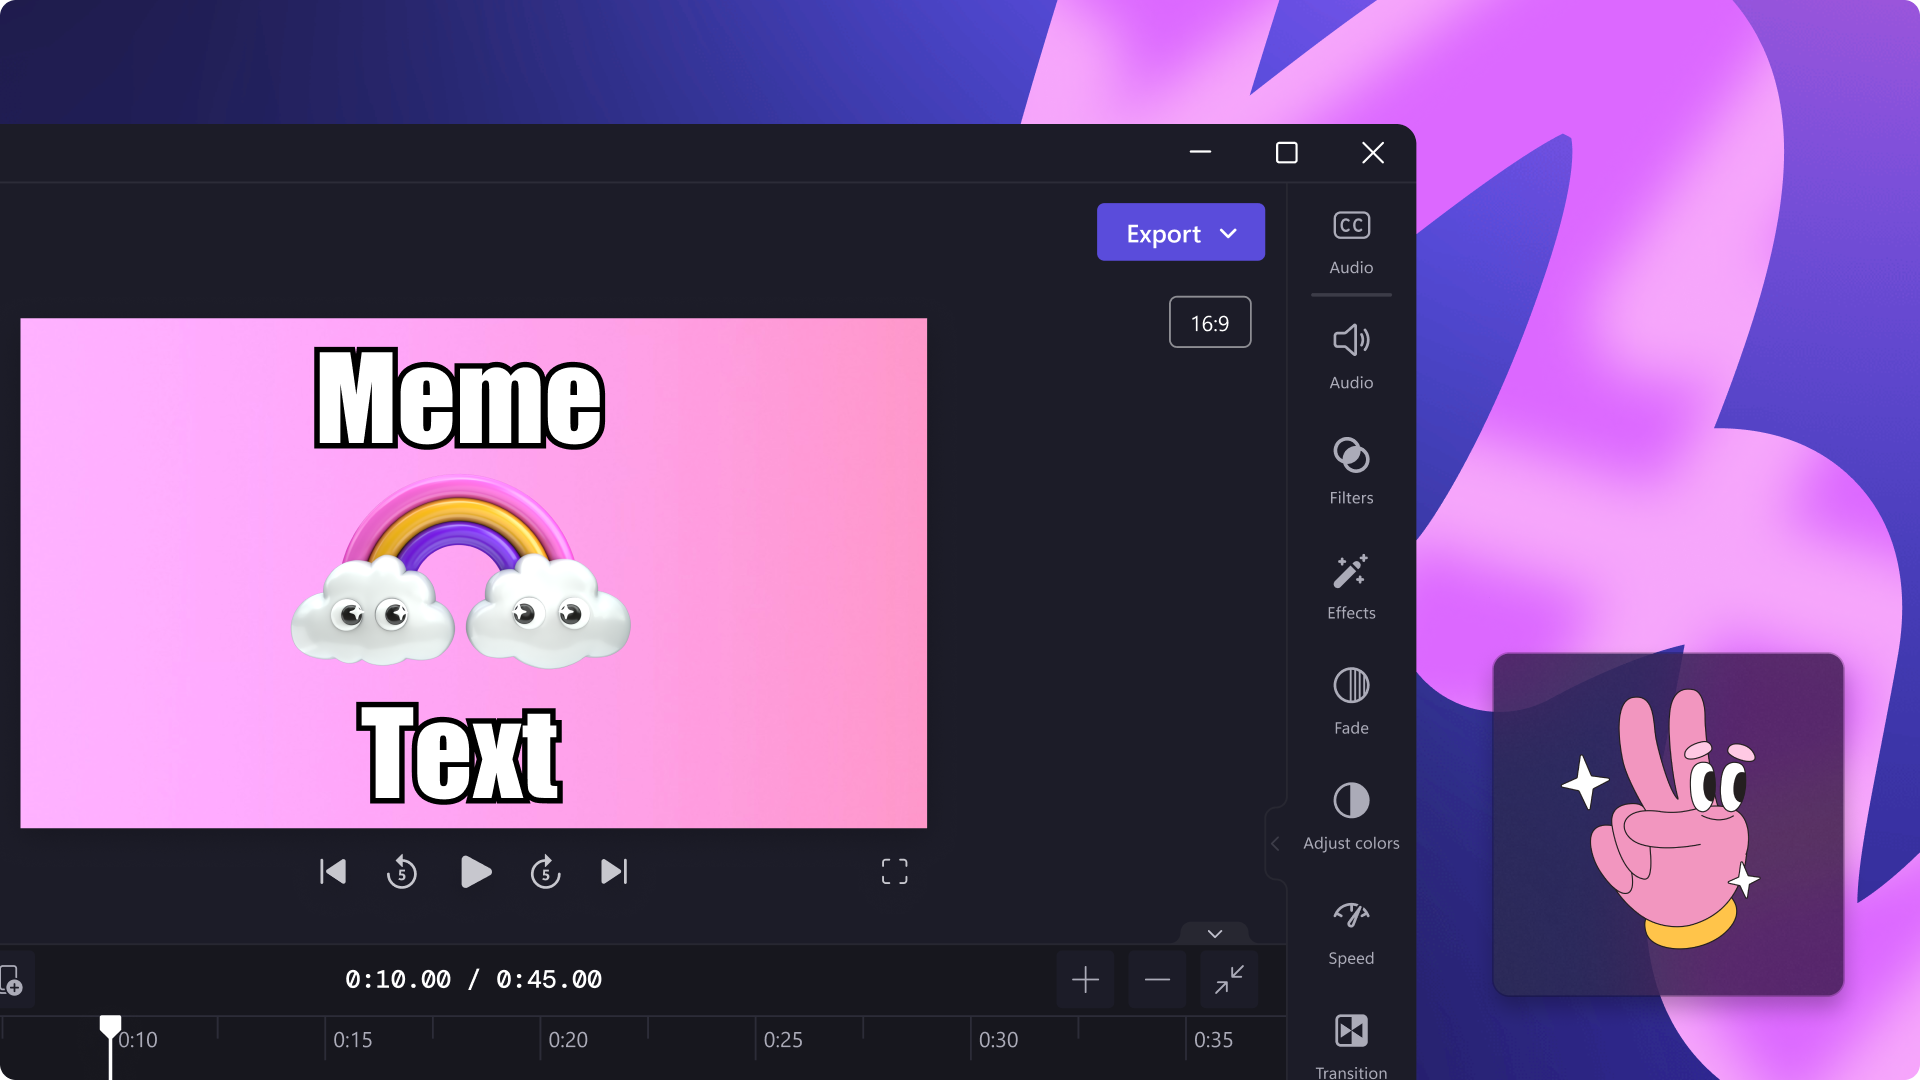 An image of a meme video in the editor.